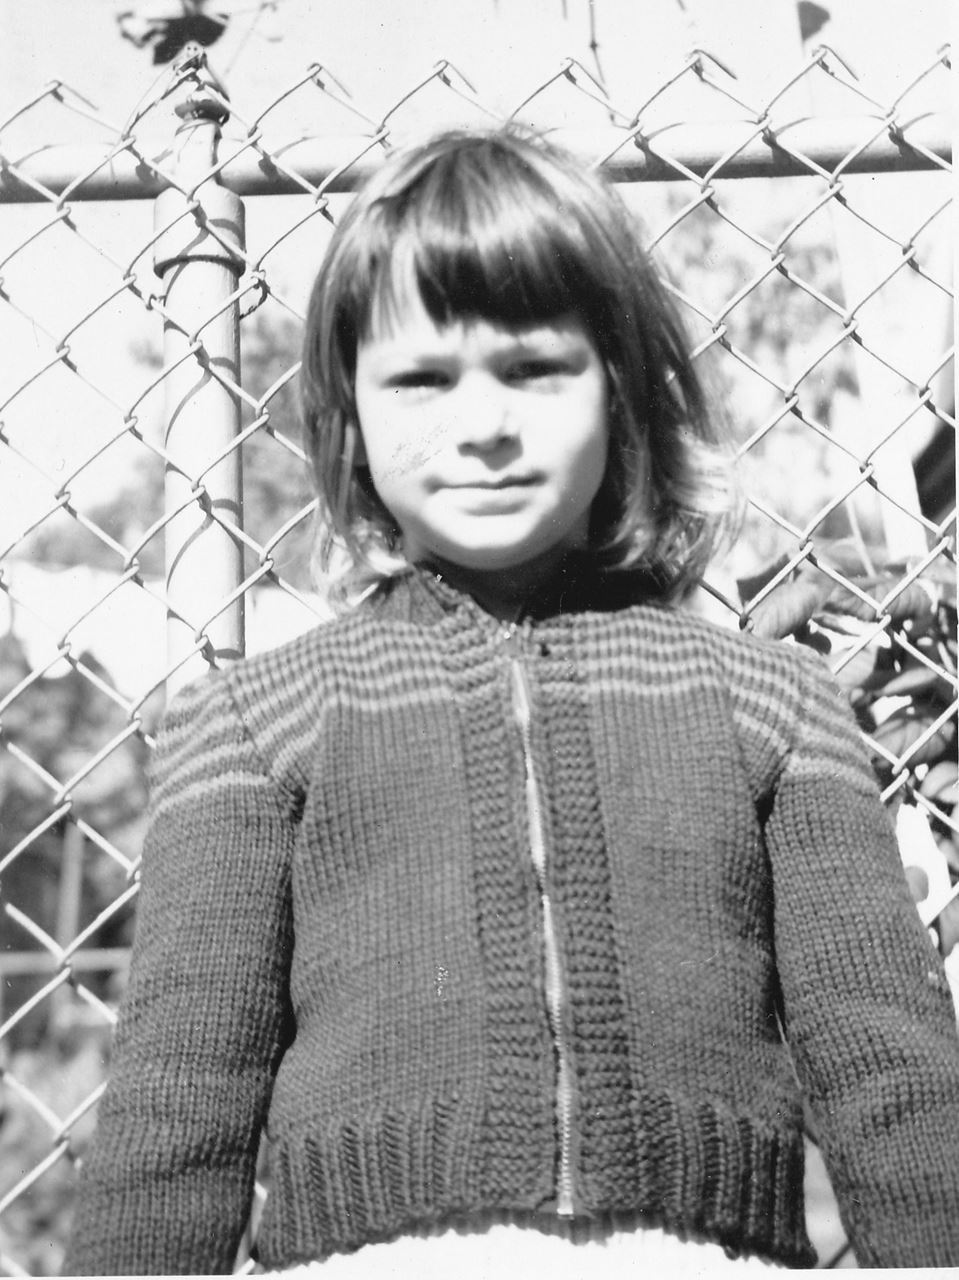 June Guralnick as a child in a sweater in front of a chain link fence - black and white photo